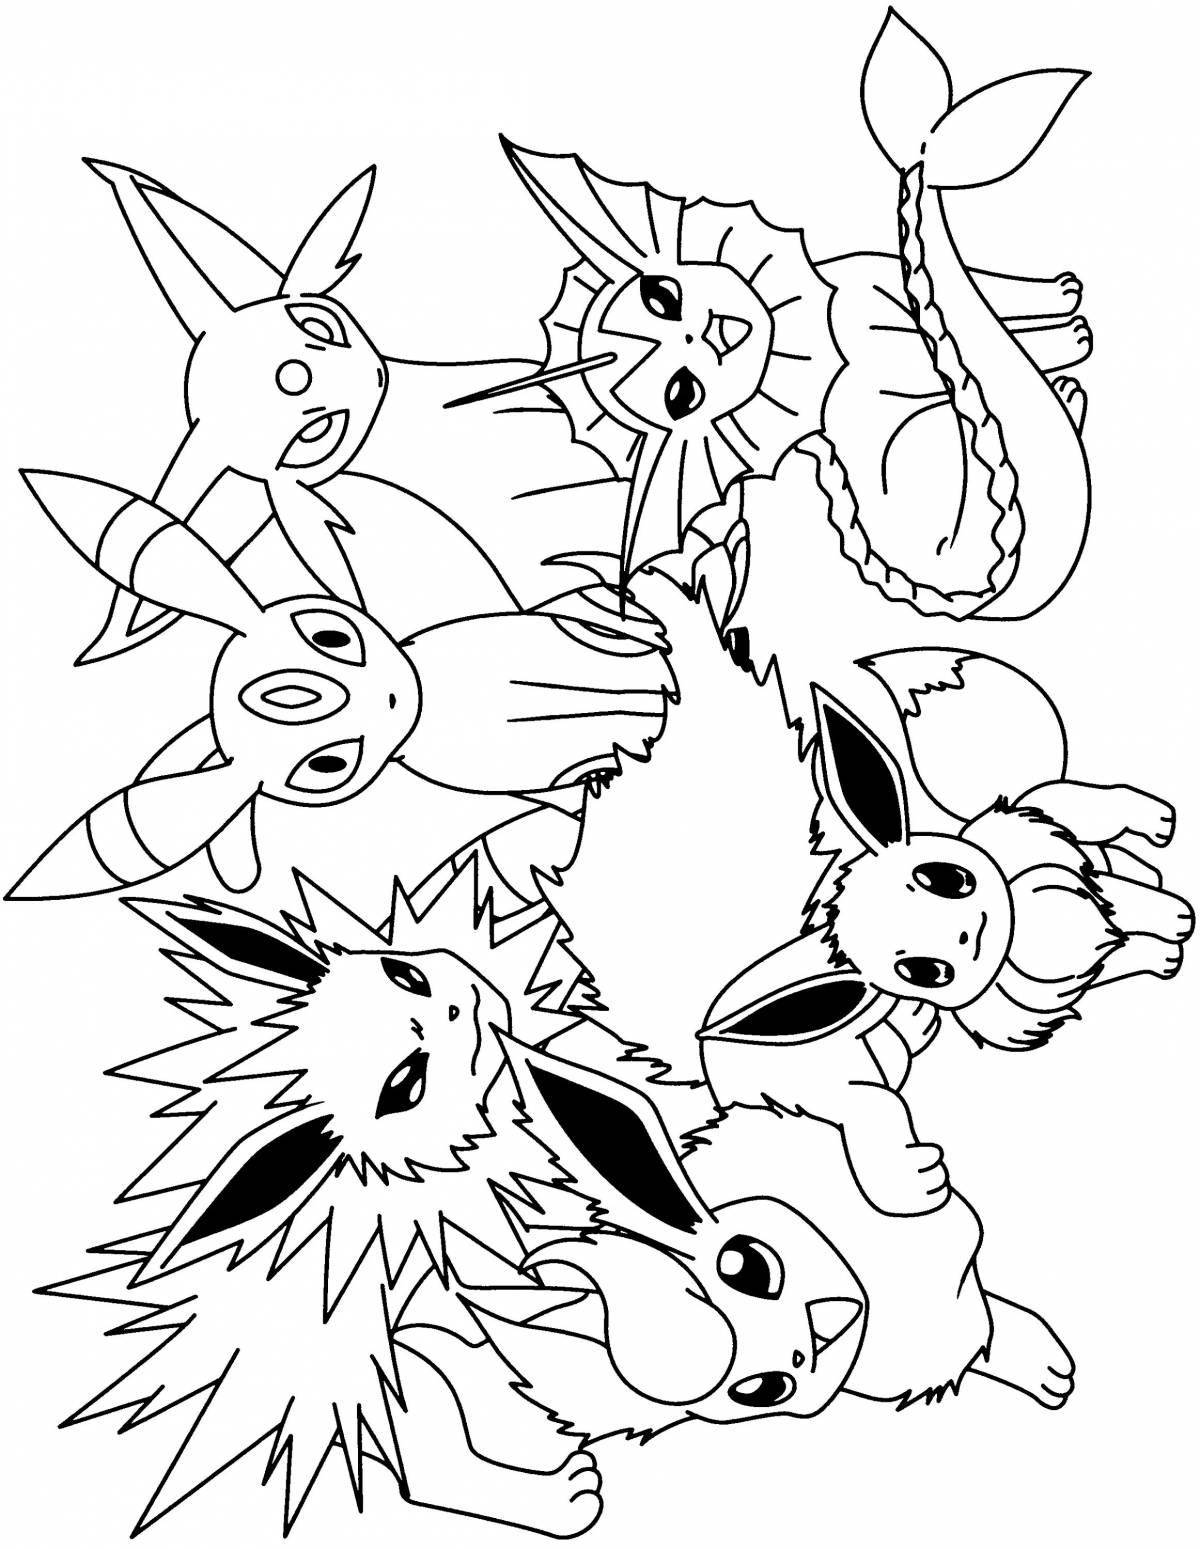 Evie and Pikachu glitter coloring book